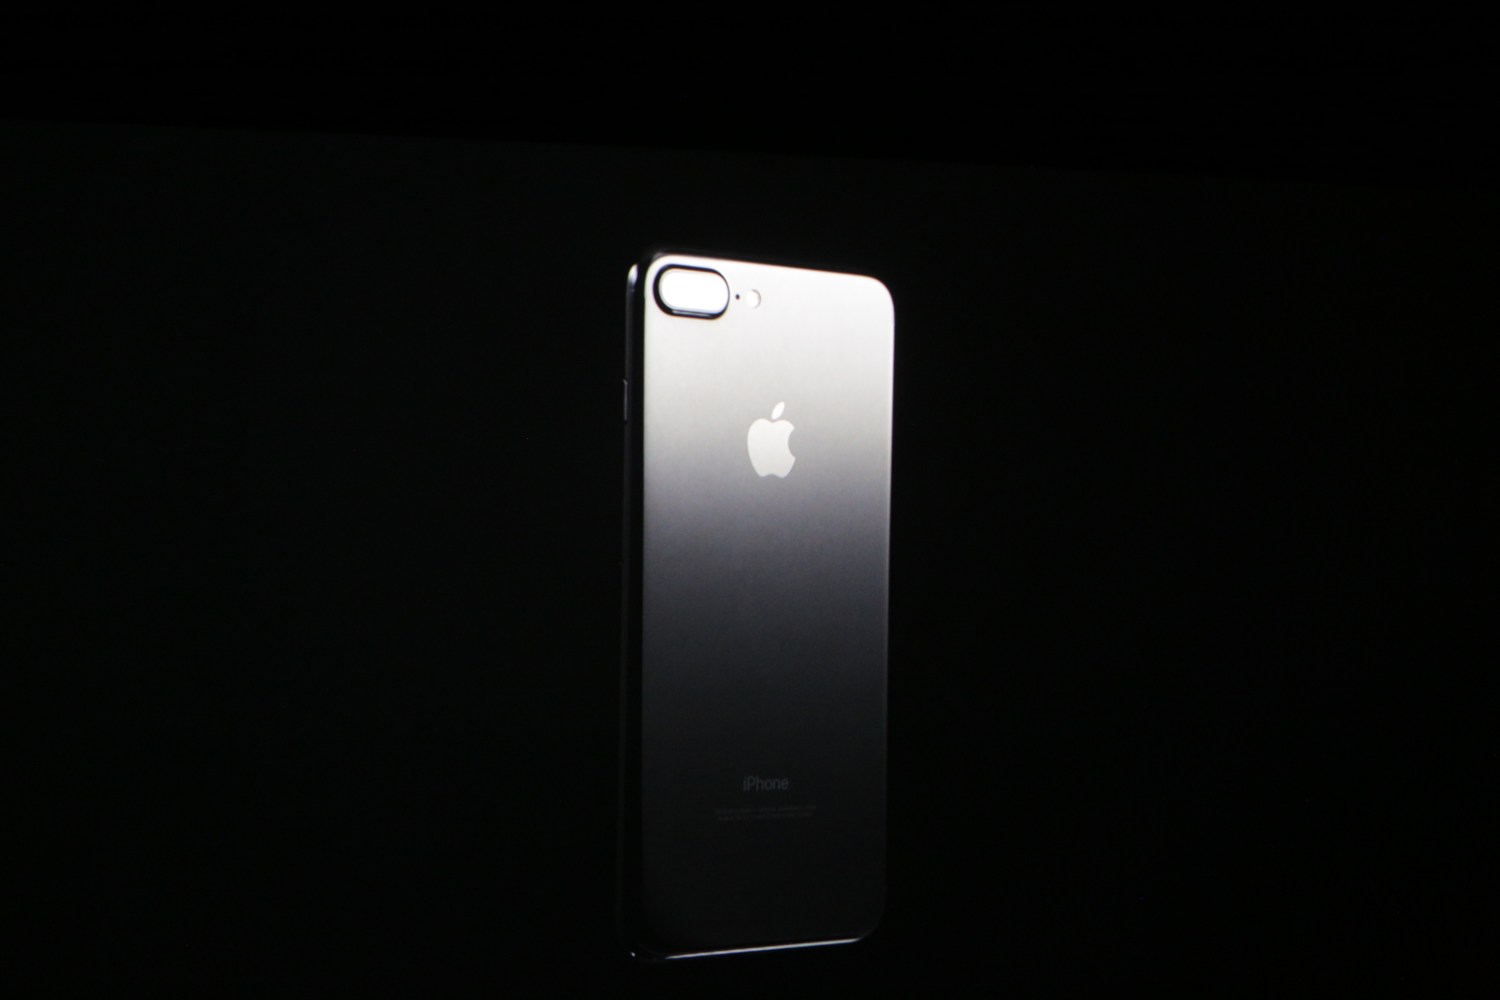 Apple *officially* unveils the iPhone 7 and iPhone 7 Plus | TechCrunch